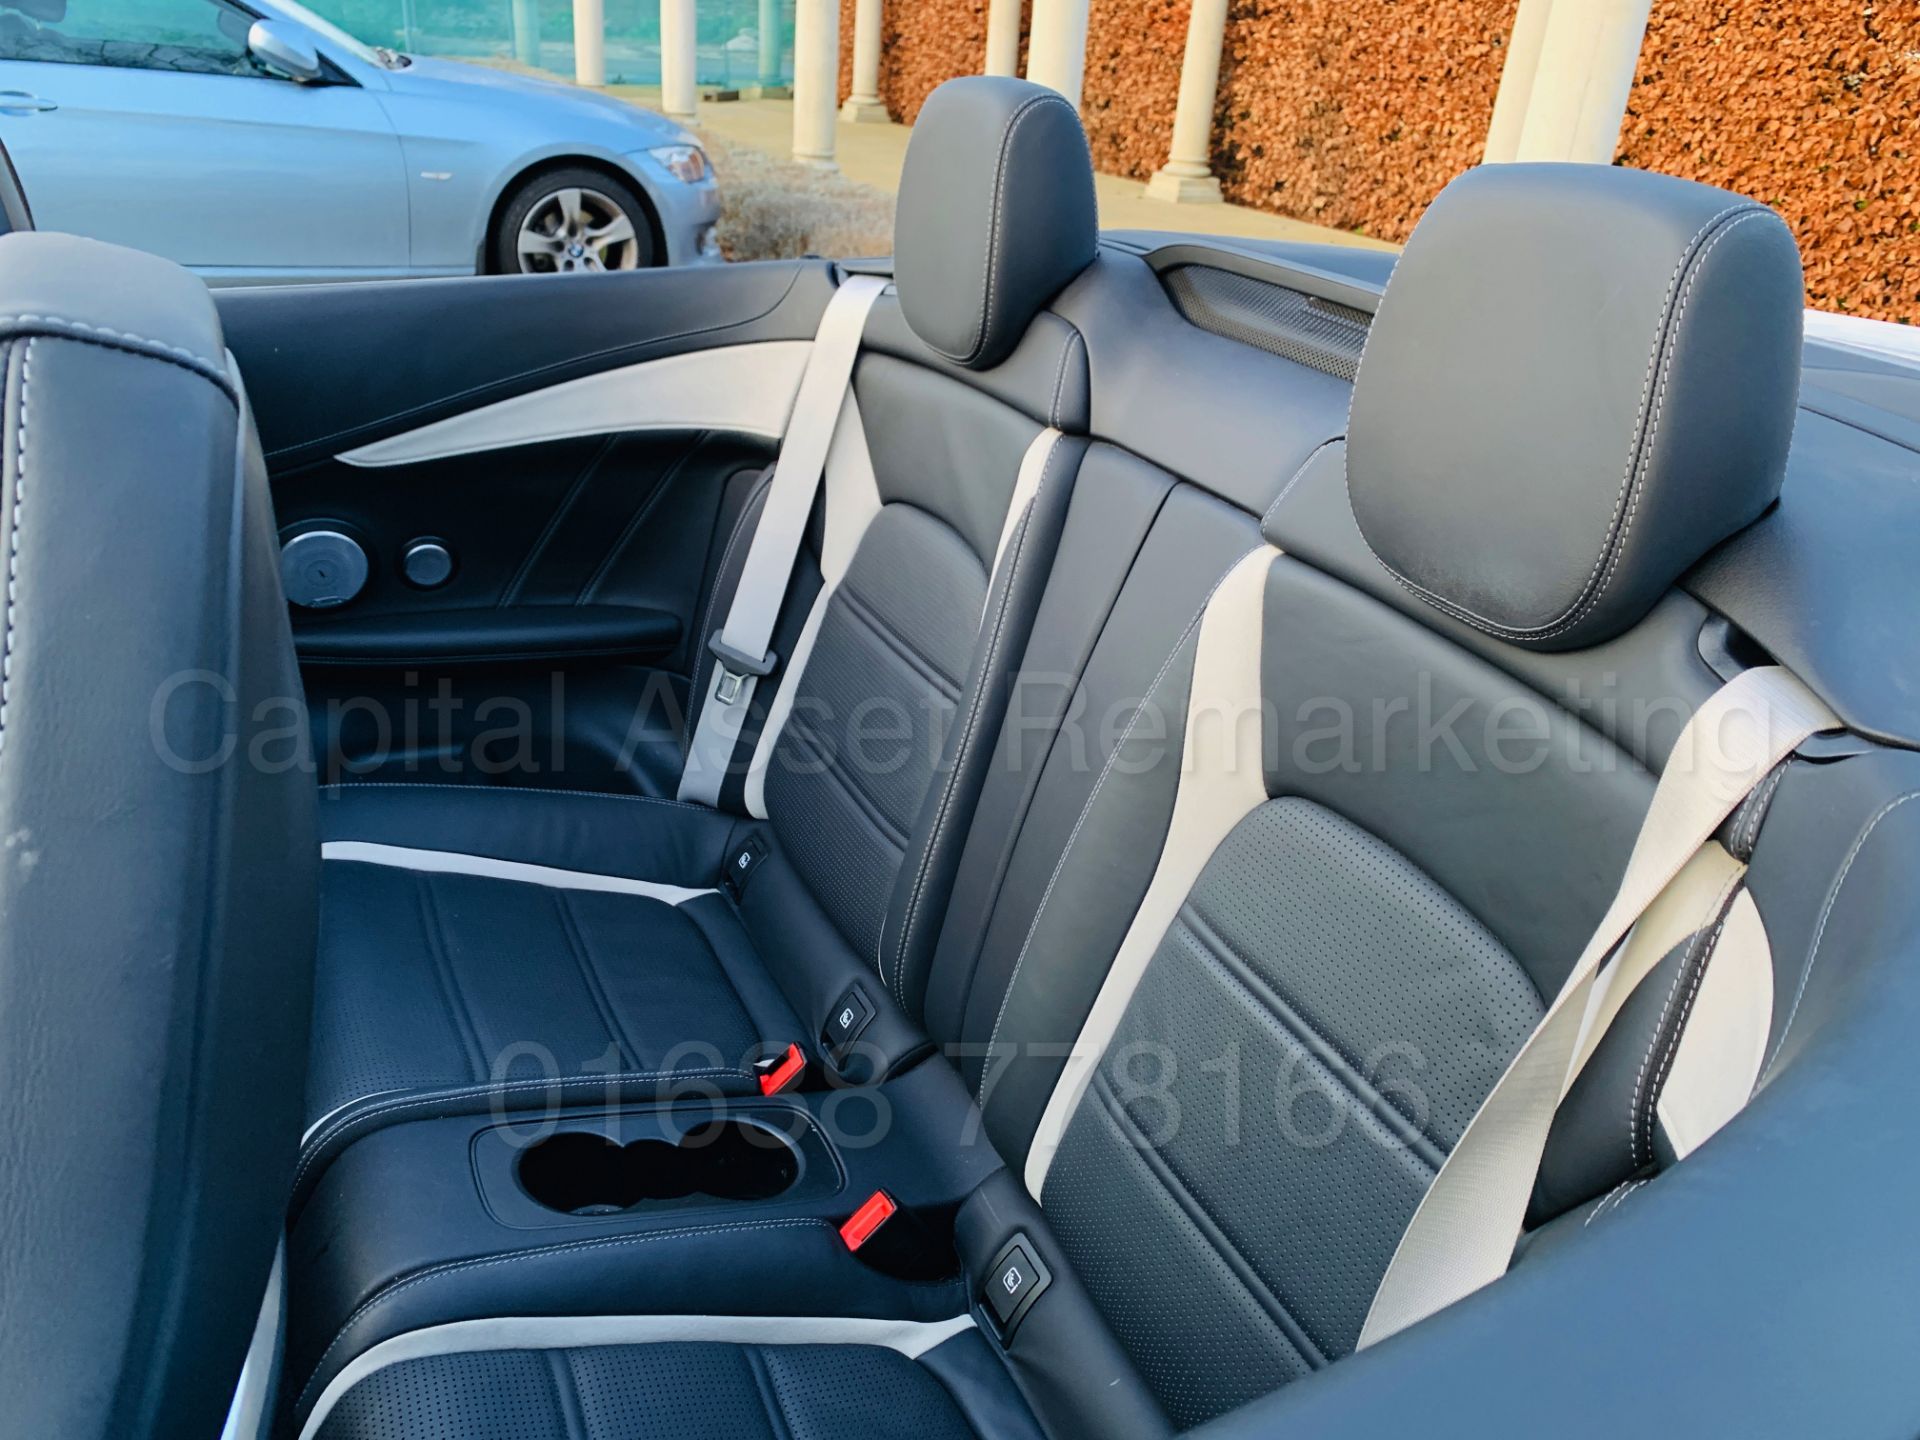 (On Sale) MERCEDES-BENZ AMG C63-S *CABRIOLET* (67 REG) '4.0 BI-TURBO -510 BHP - AUTO' *FULLY LOADED* - Image 48 of 79